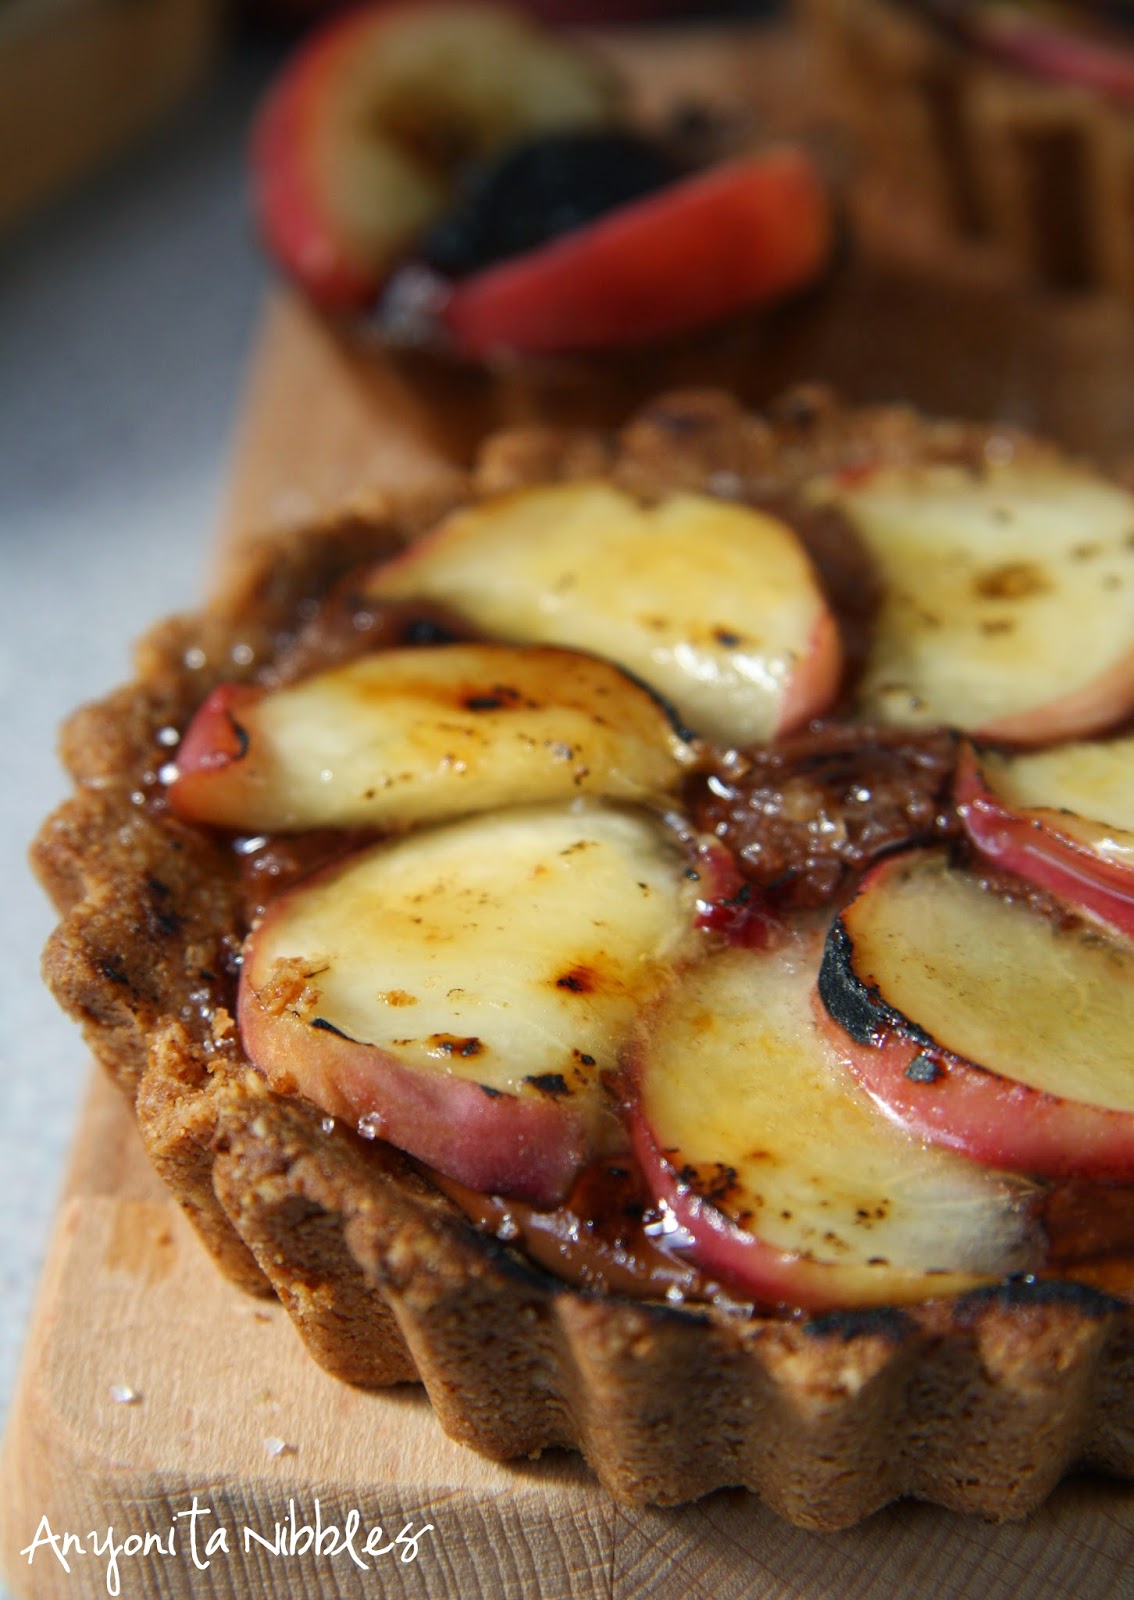 Lightly burnished peaches in a peach & Nutella tart by Anyonita Nibbles